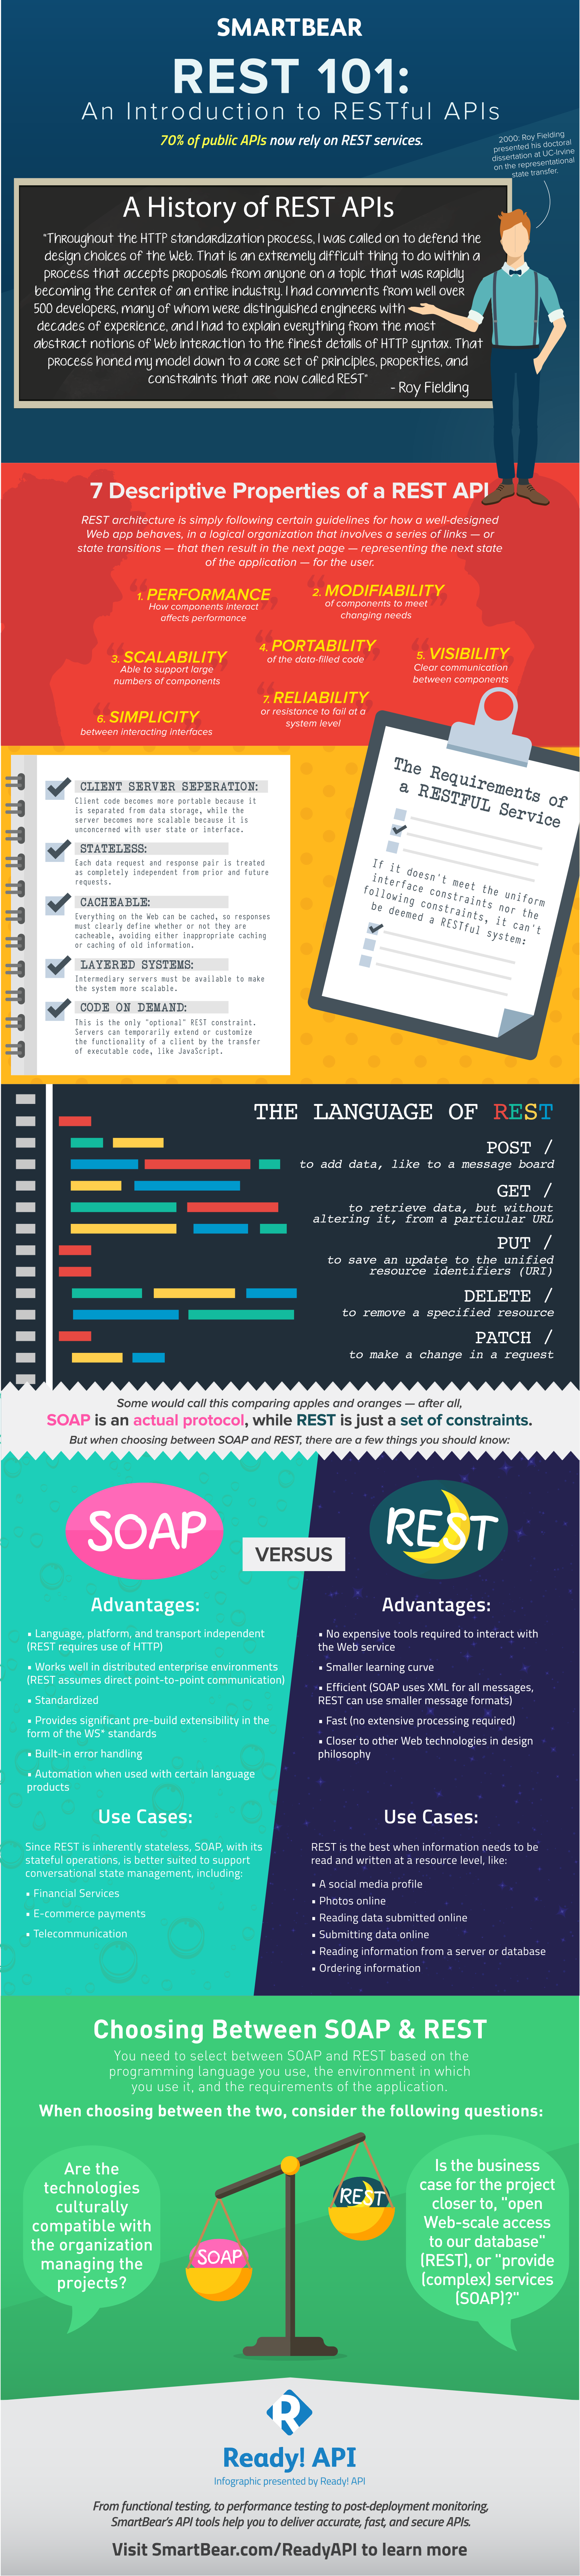 REST 101 Infographic Final